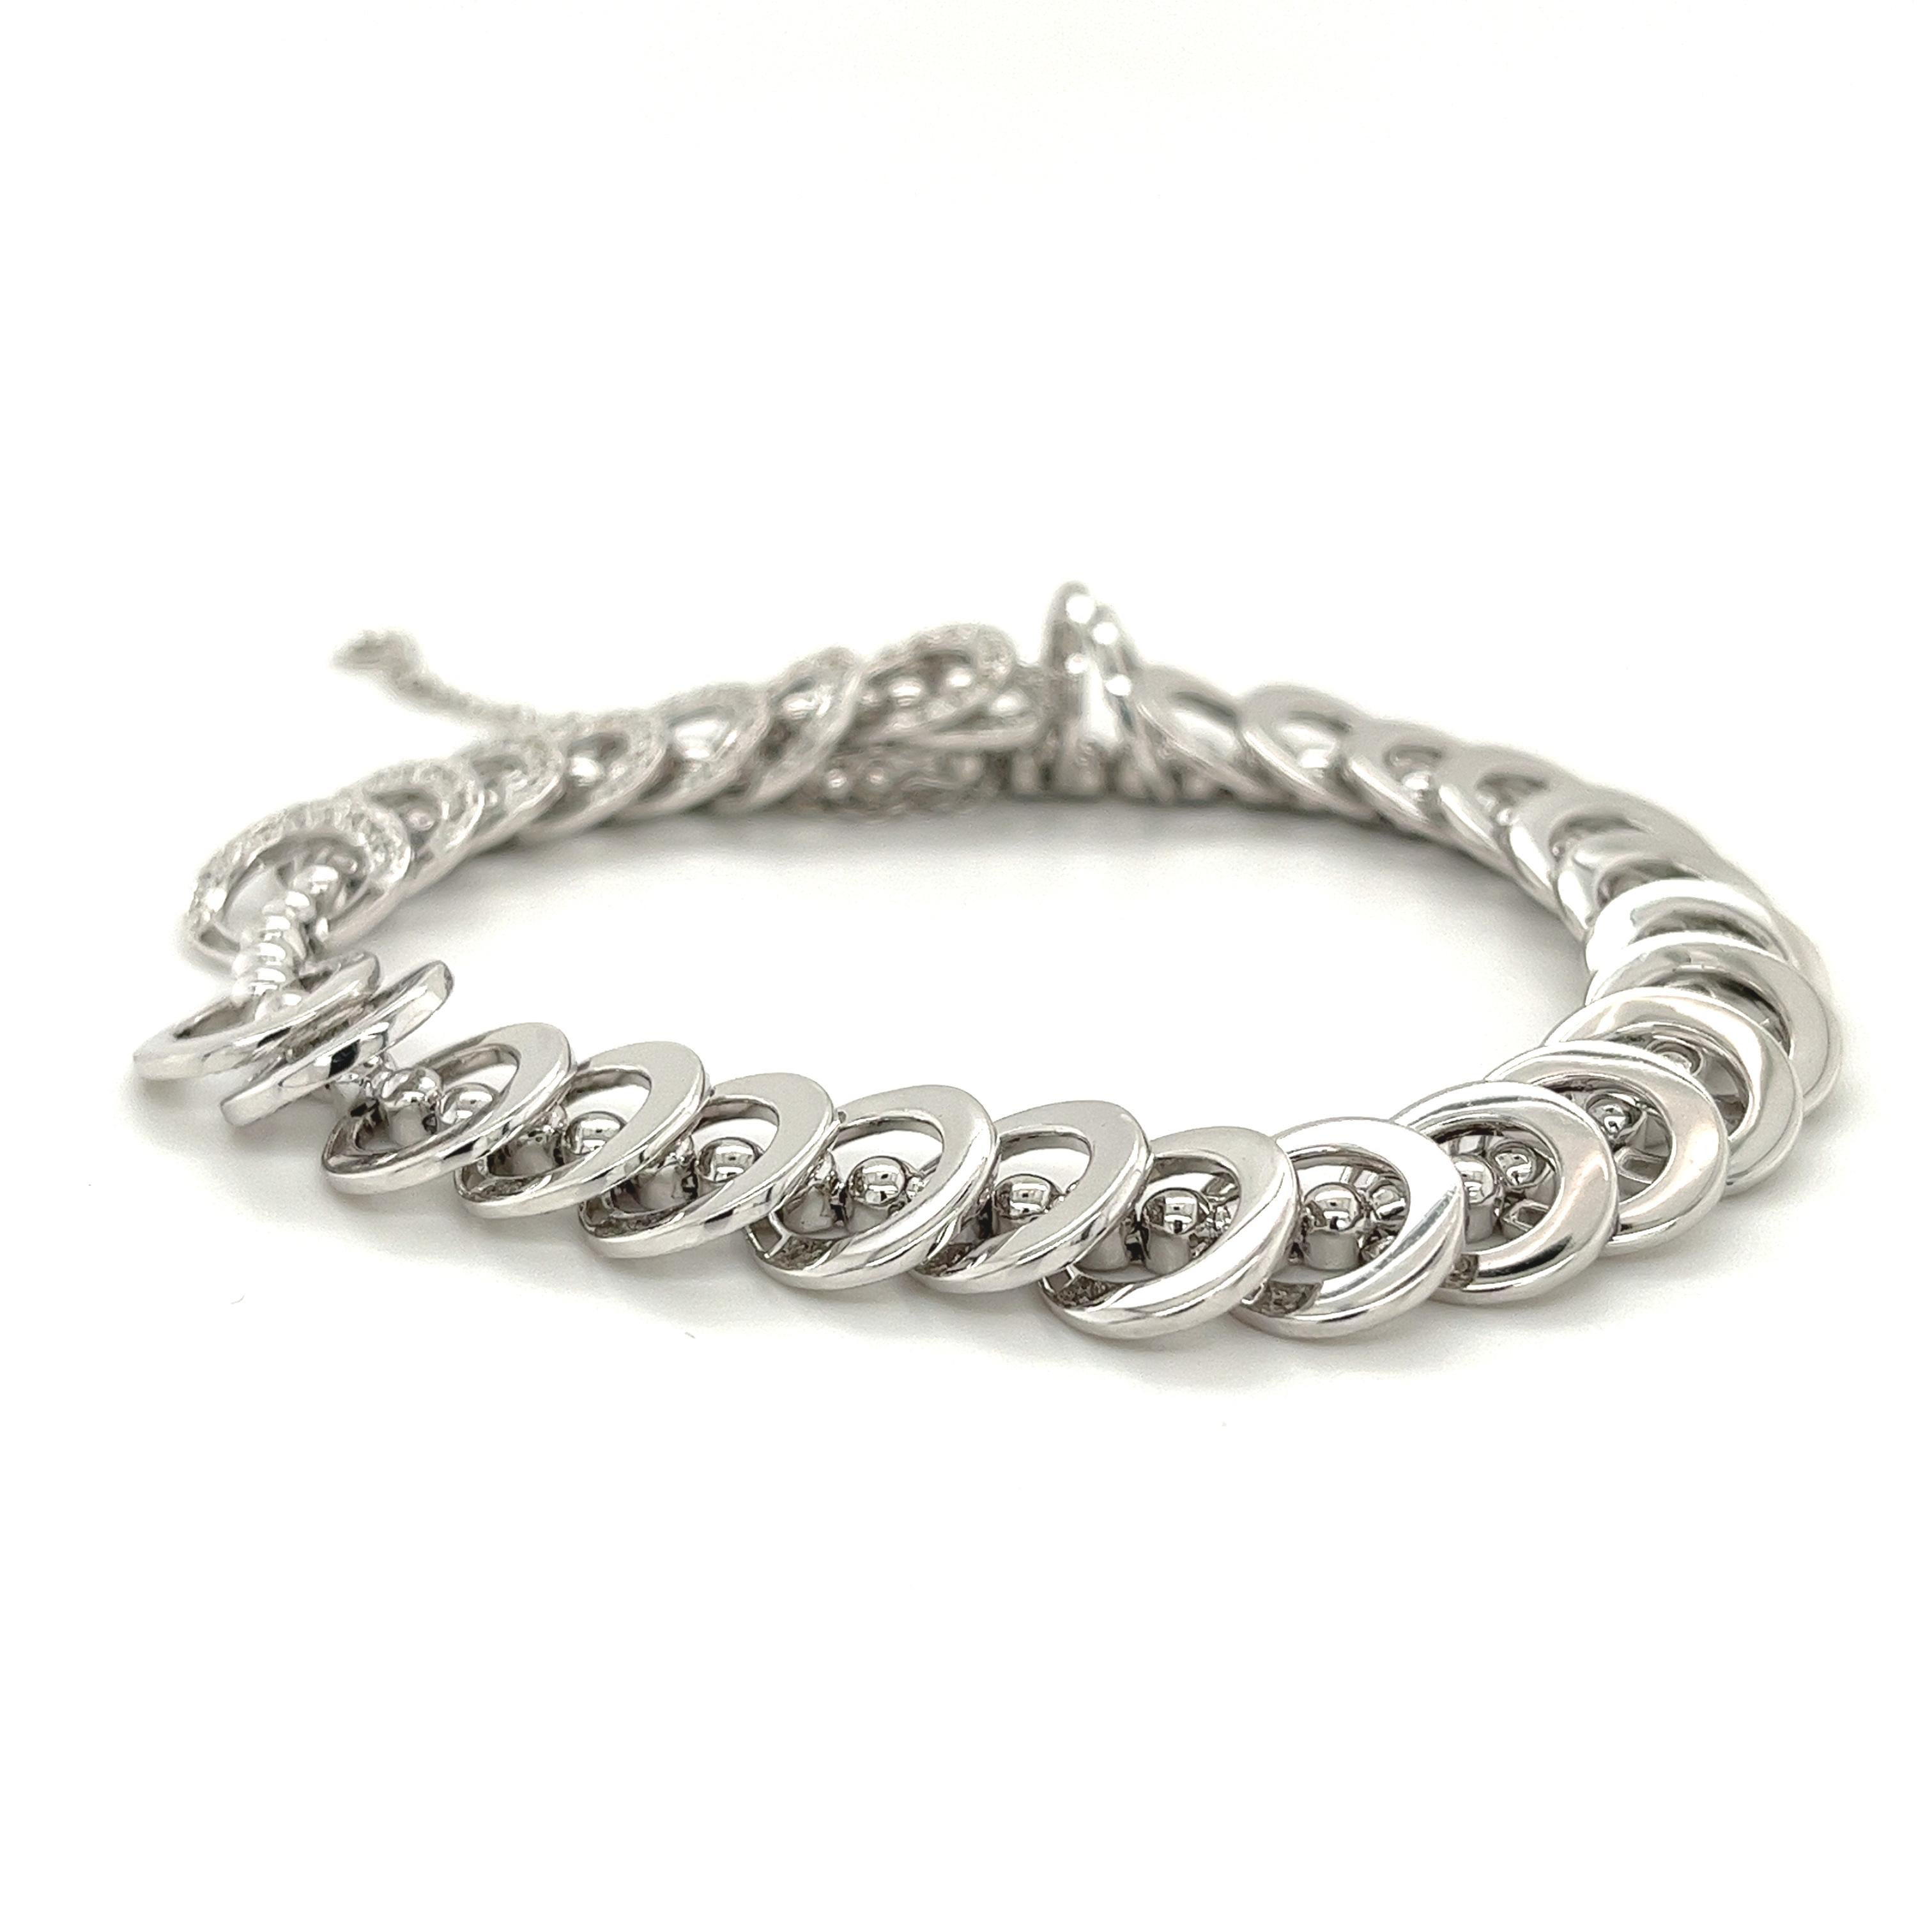 Introducing this one-of-one, 18 karat solid white gold natural diamond link bracelet. Hypoallergenic, shower safe, and engineered for daily wear. 7 inches with a 2.5-inch extension piece. 

This bracelet is a showstopping head-turner that you will